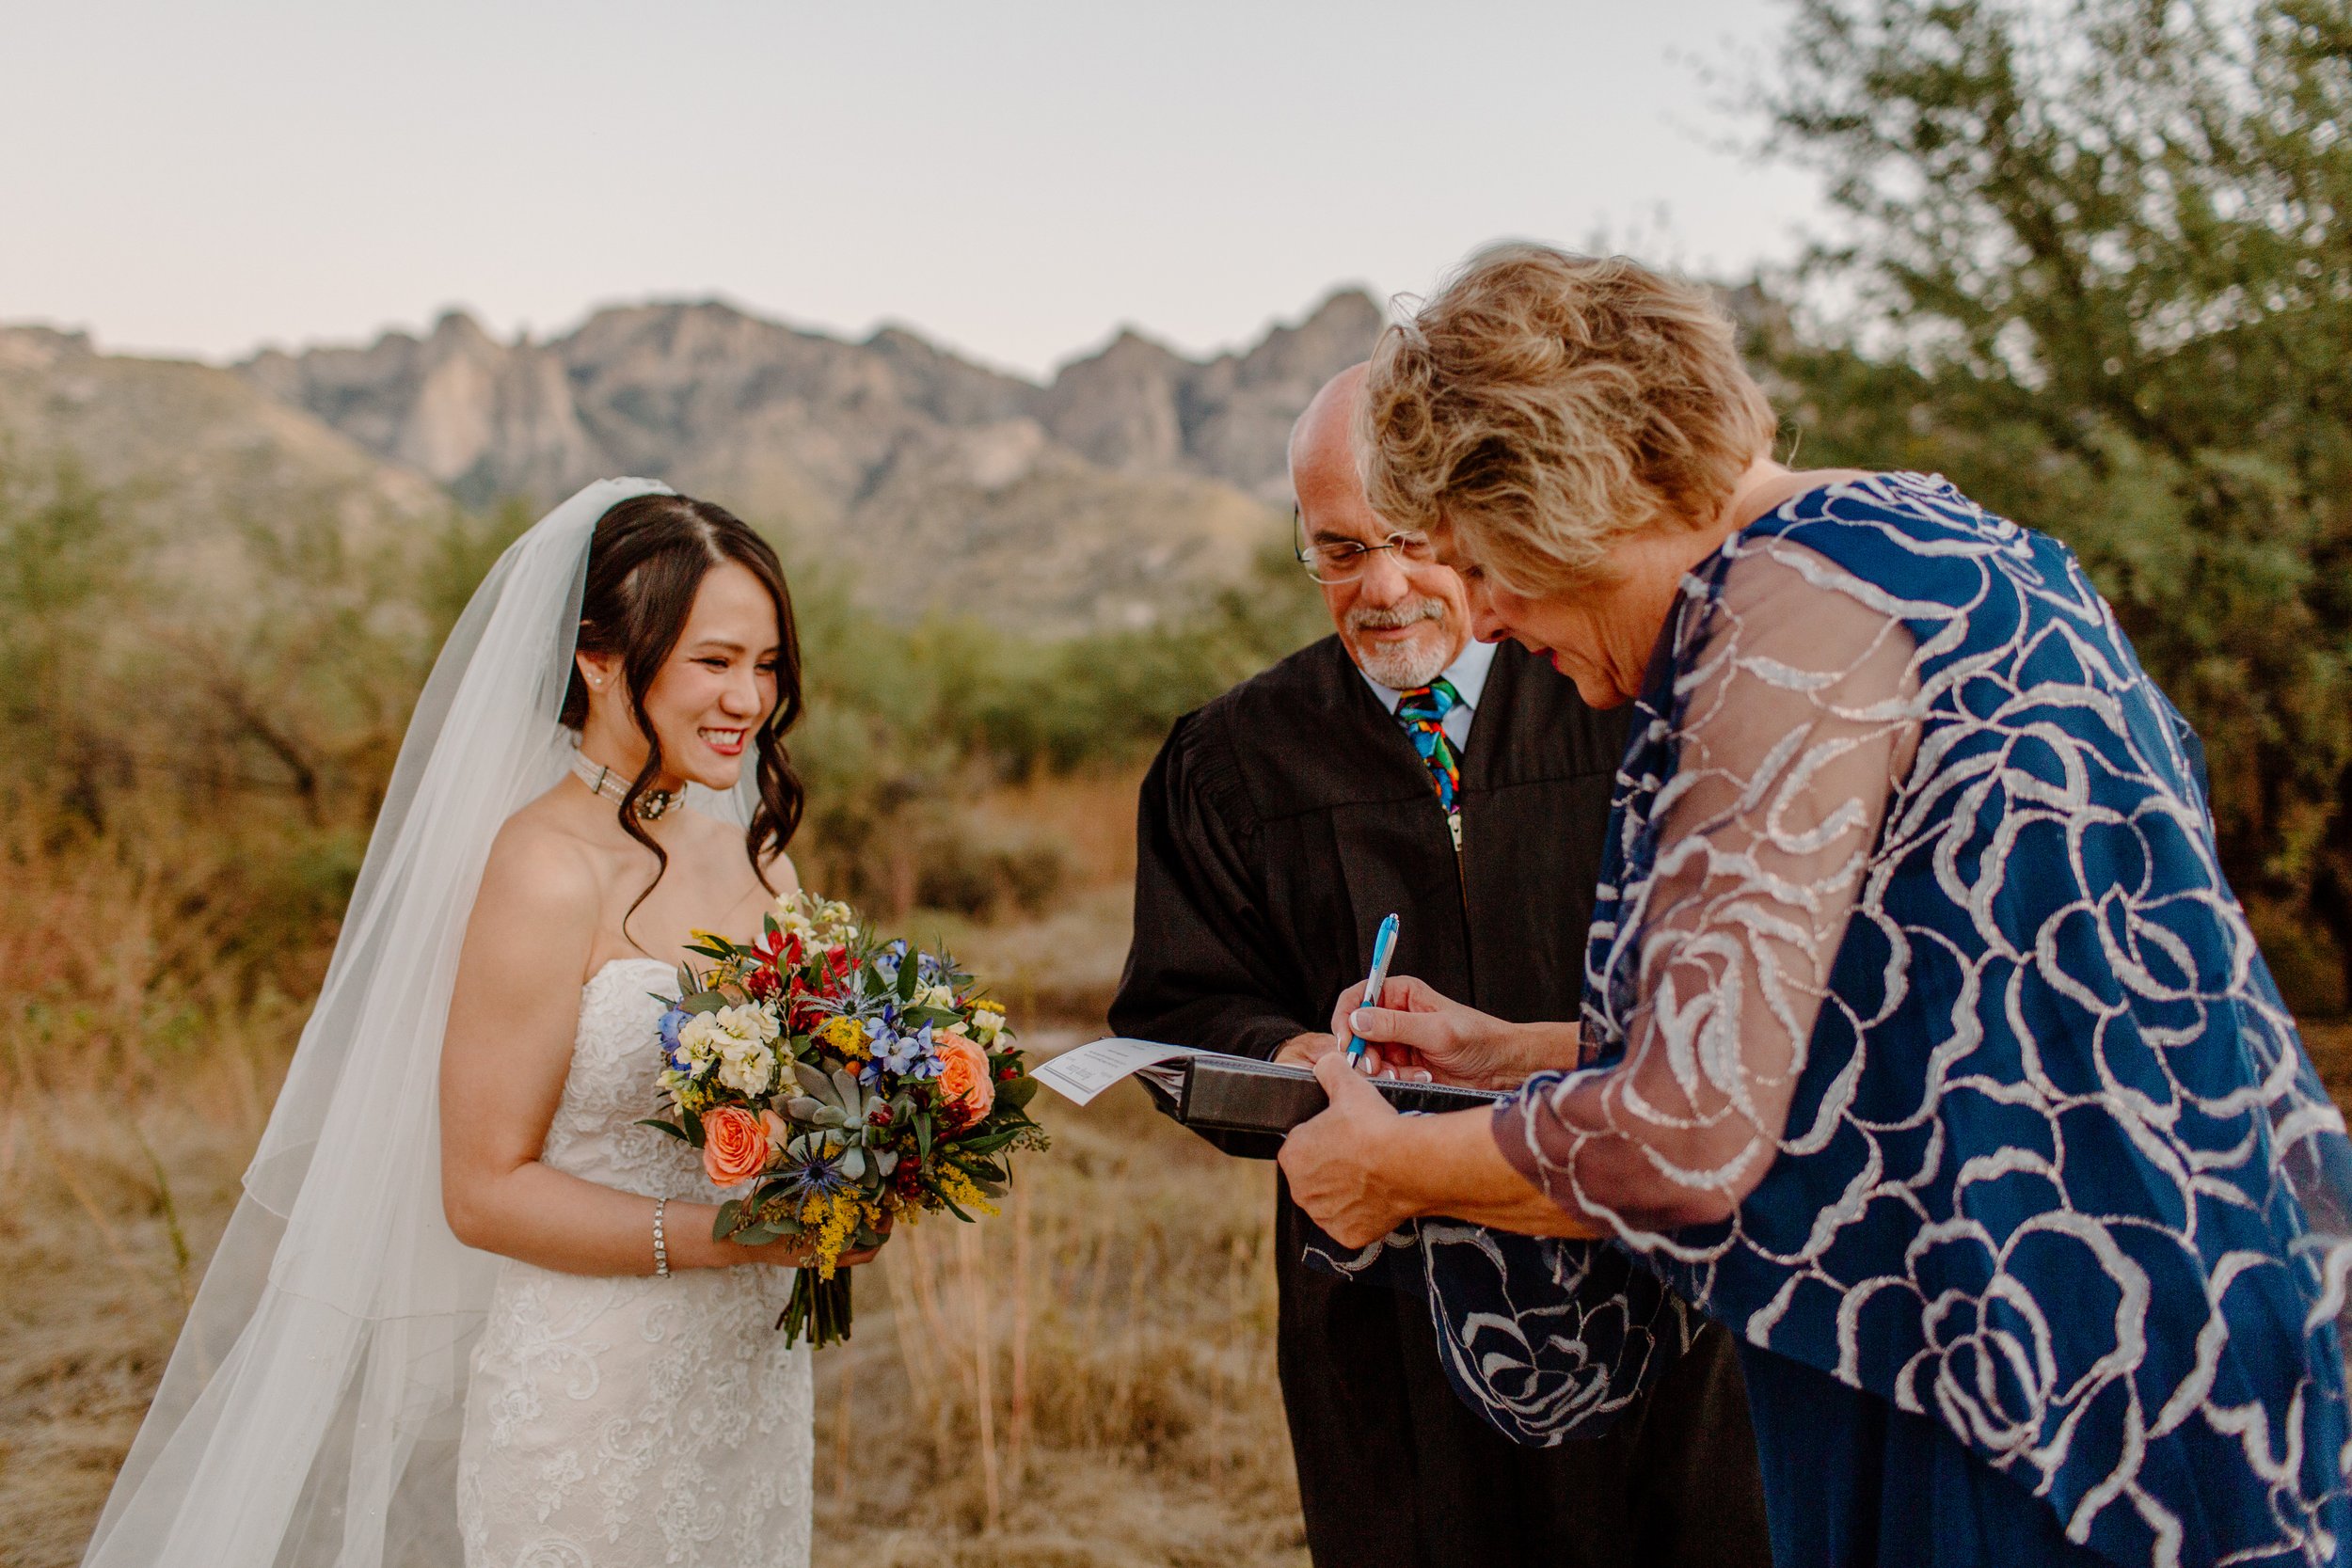  witnesses sign marriage license after intimate ceremony by Arizona elopement photographer  